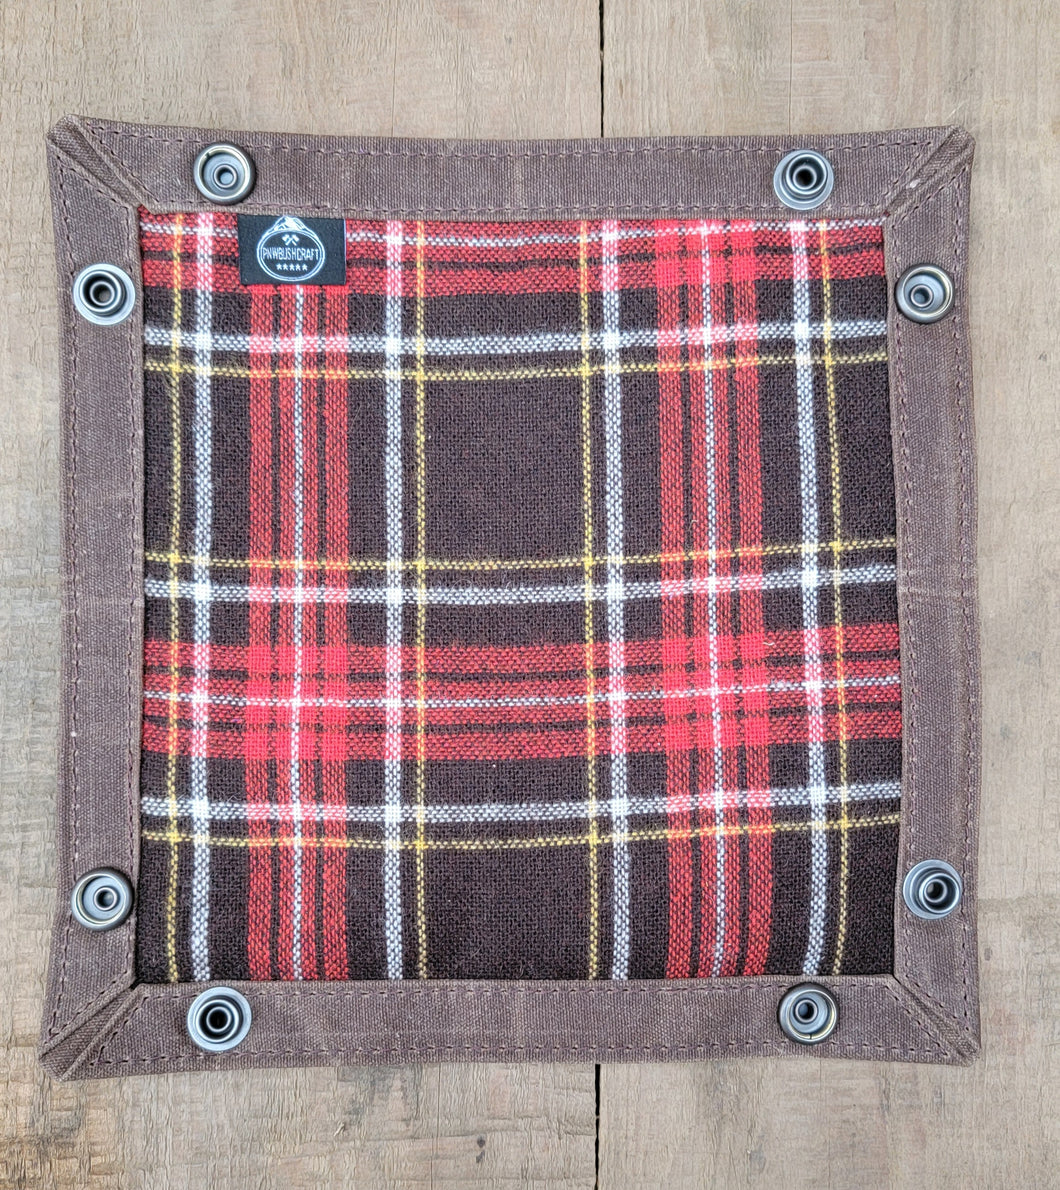 Vintage Wool and Waxed Canvas Small Travel Tray for your Gear or EDC